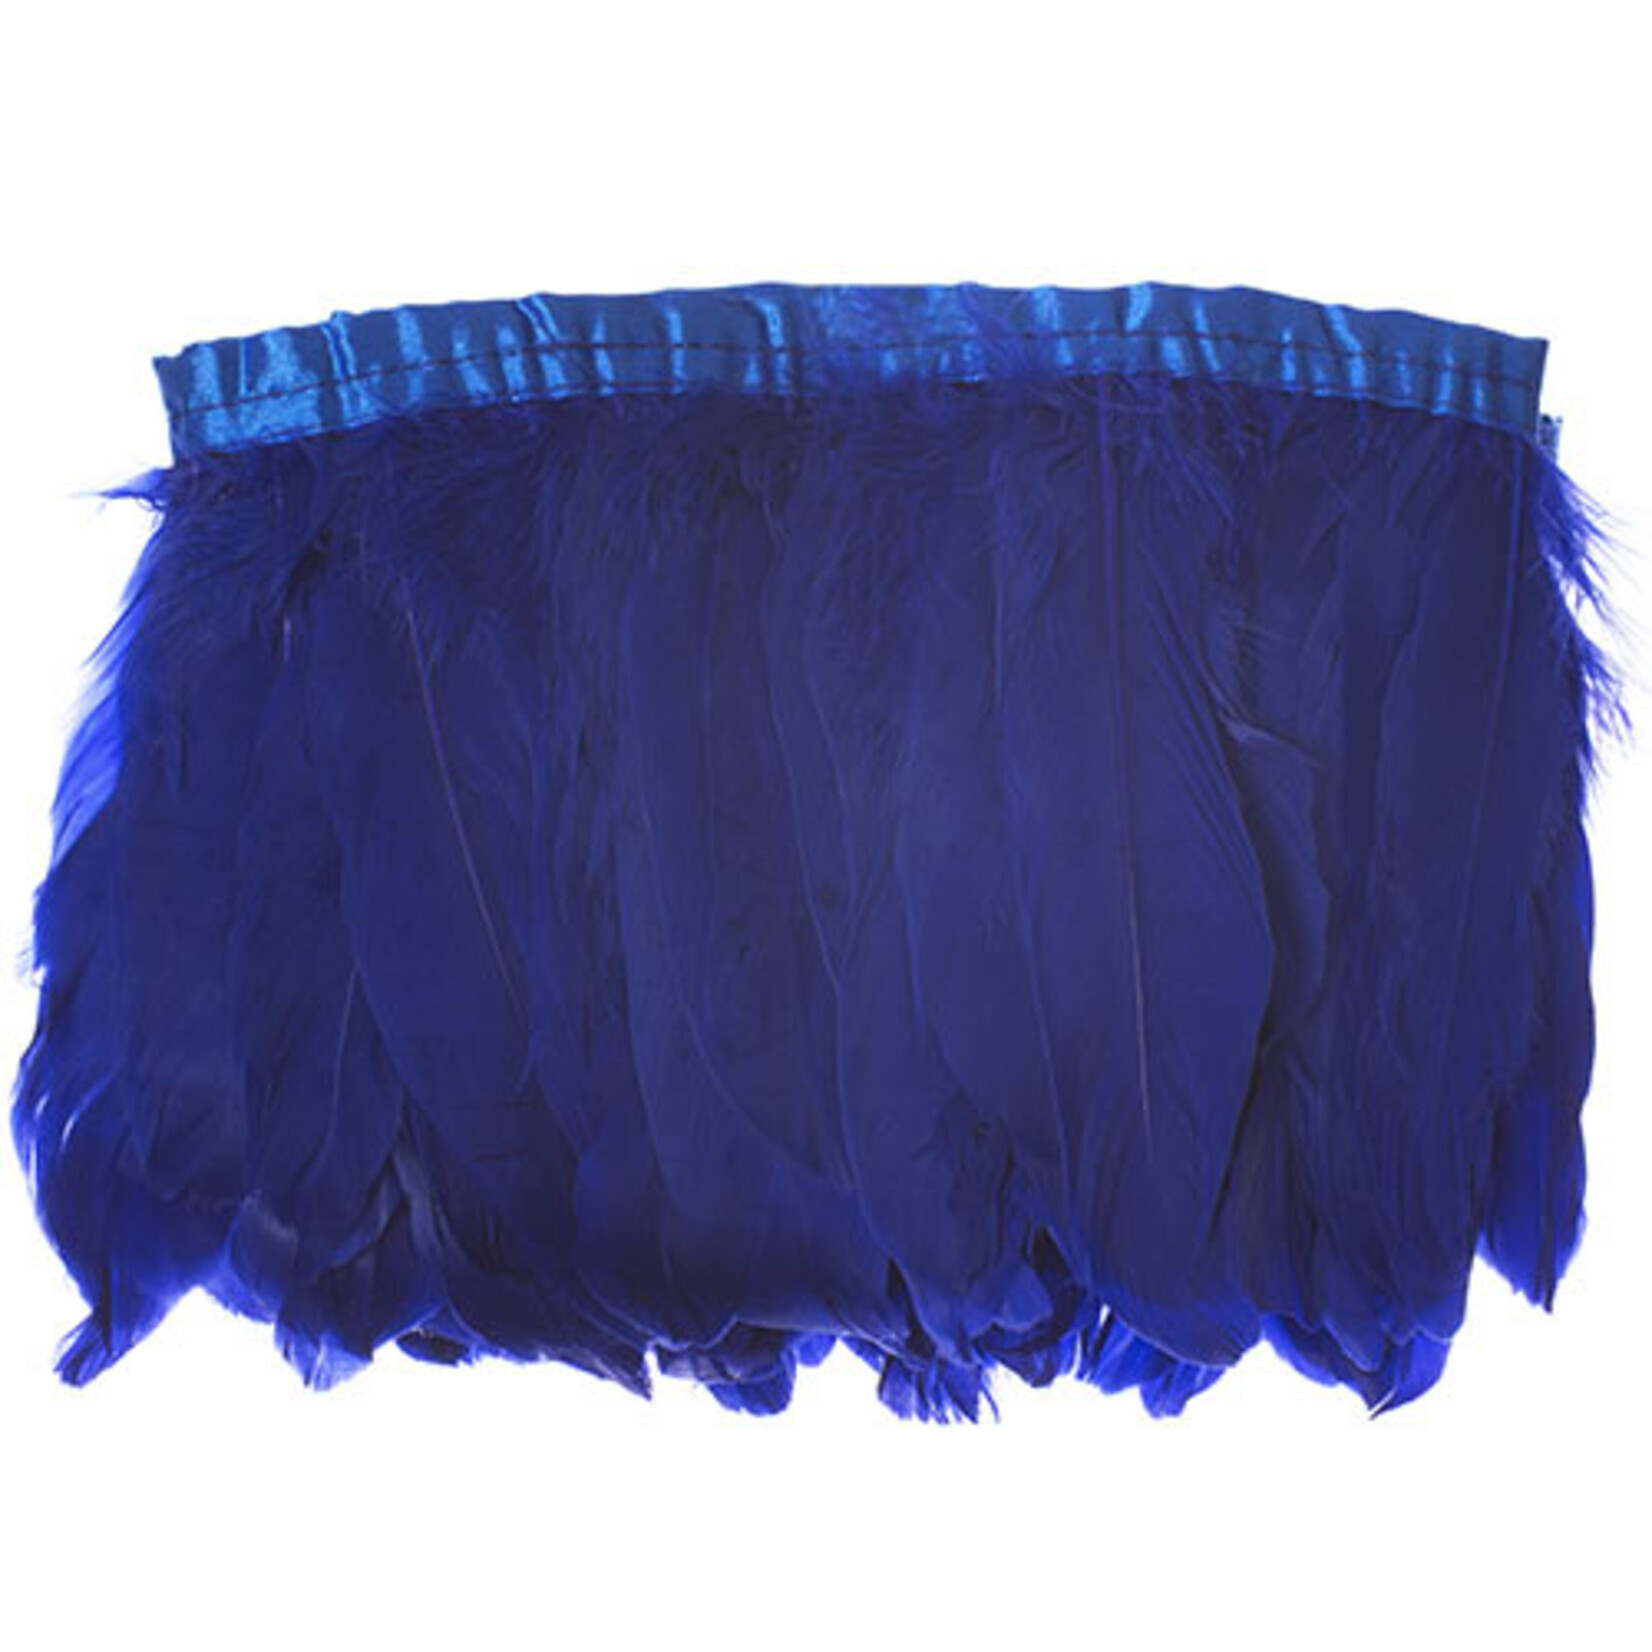 Goose Feather Strung 5.5-7 inches (2 yards) Royal Blue